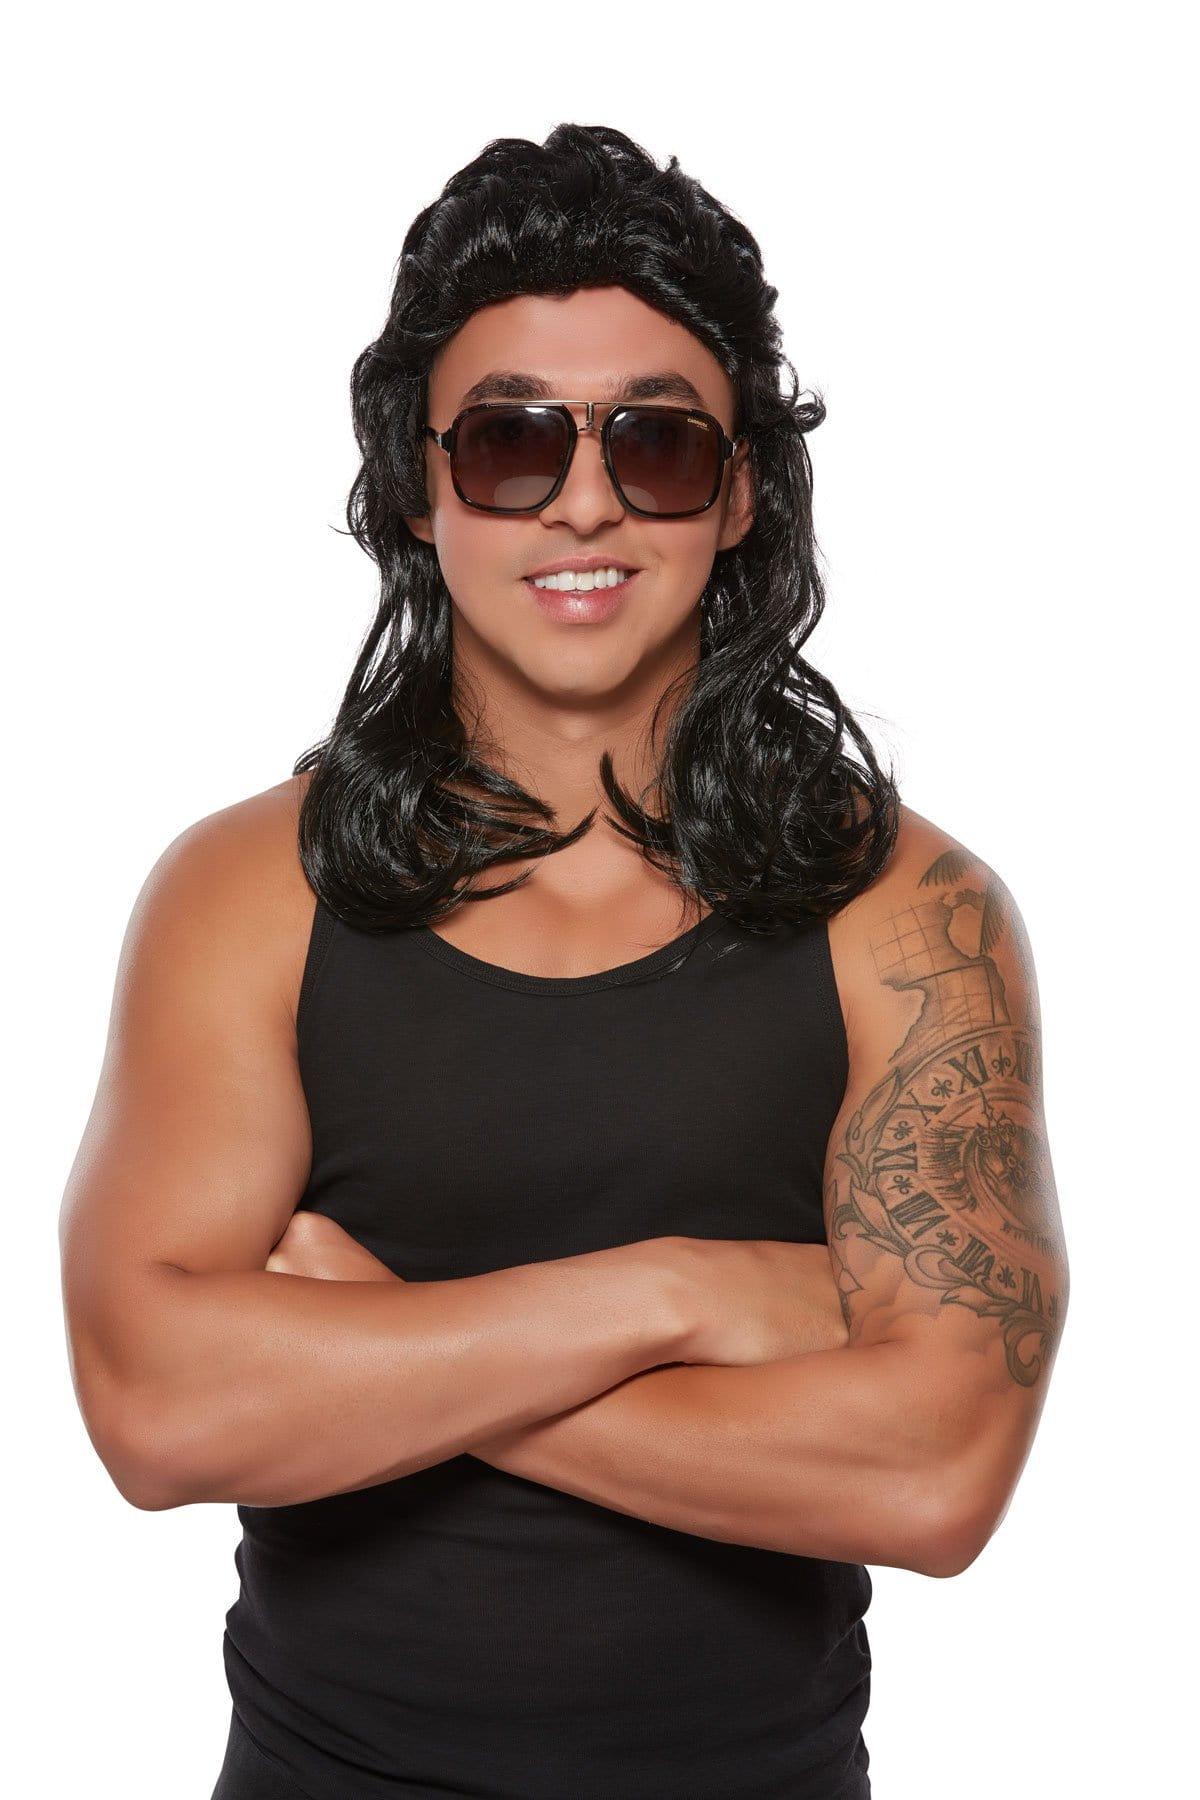 Buy Costume Accessories Black Mullet Wig for Men sold at Party Expert